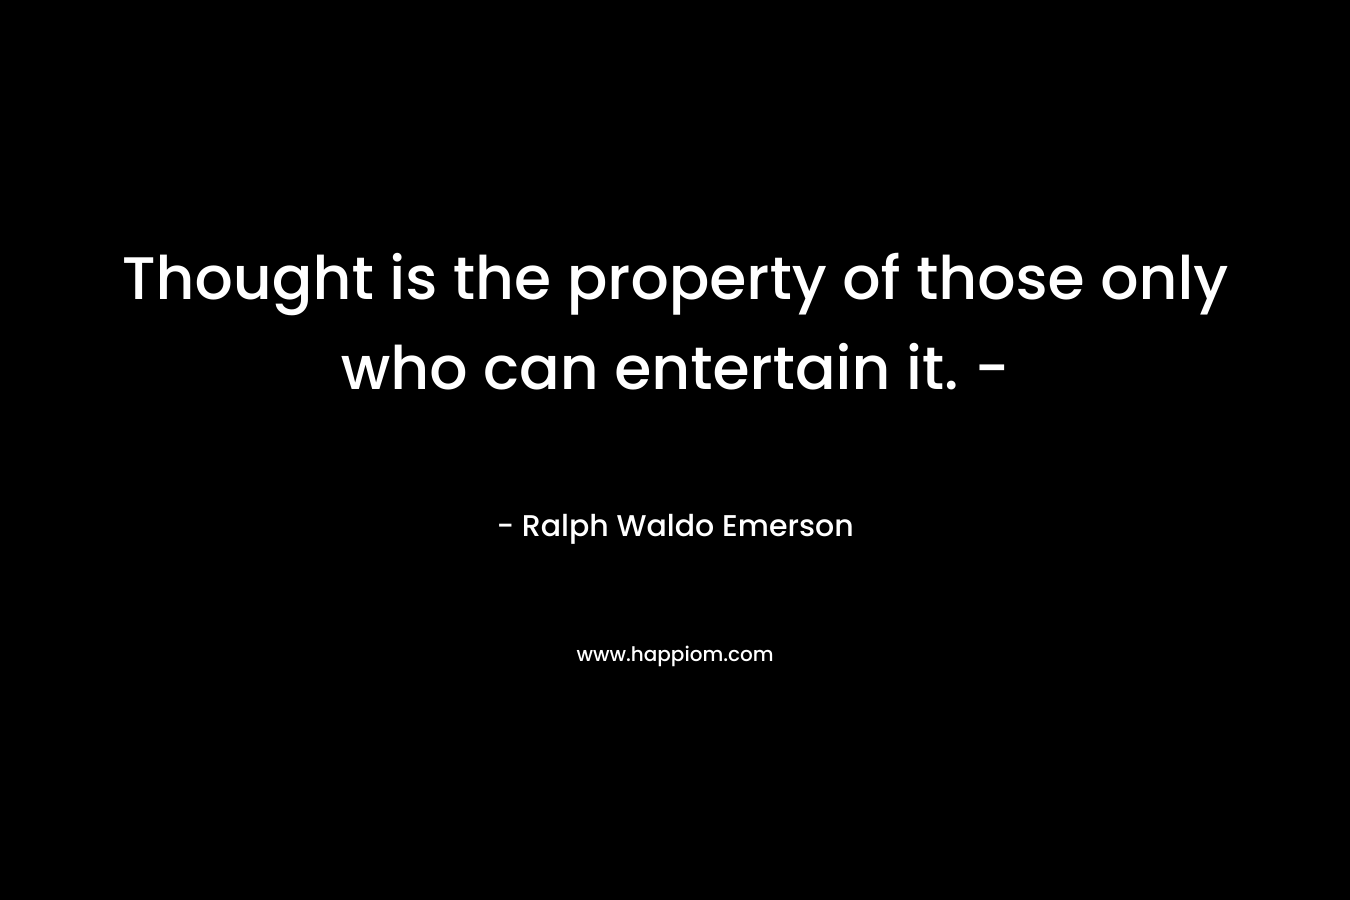 Thought is the property of those only who can entertain it. – – Ralph Waldo Emerson